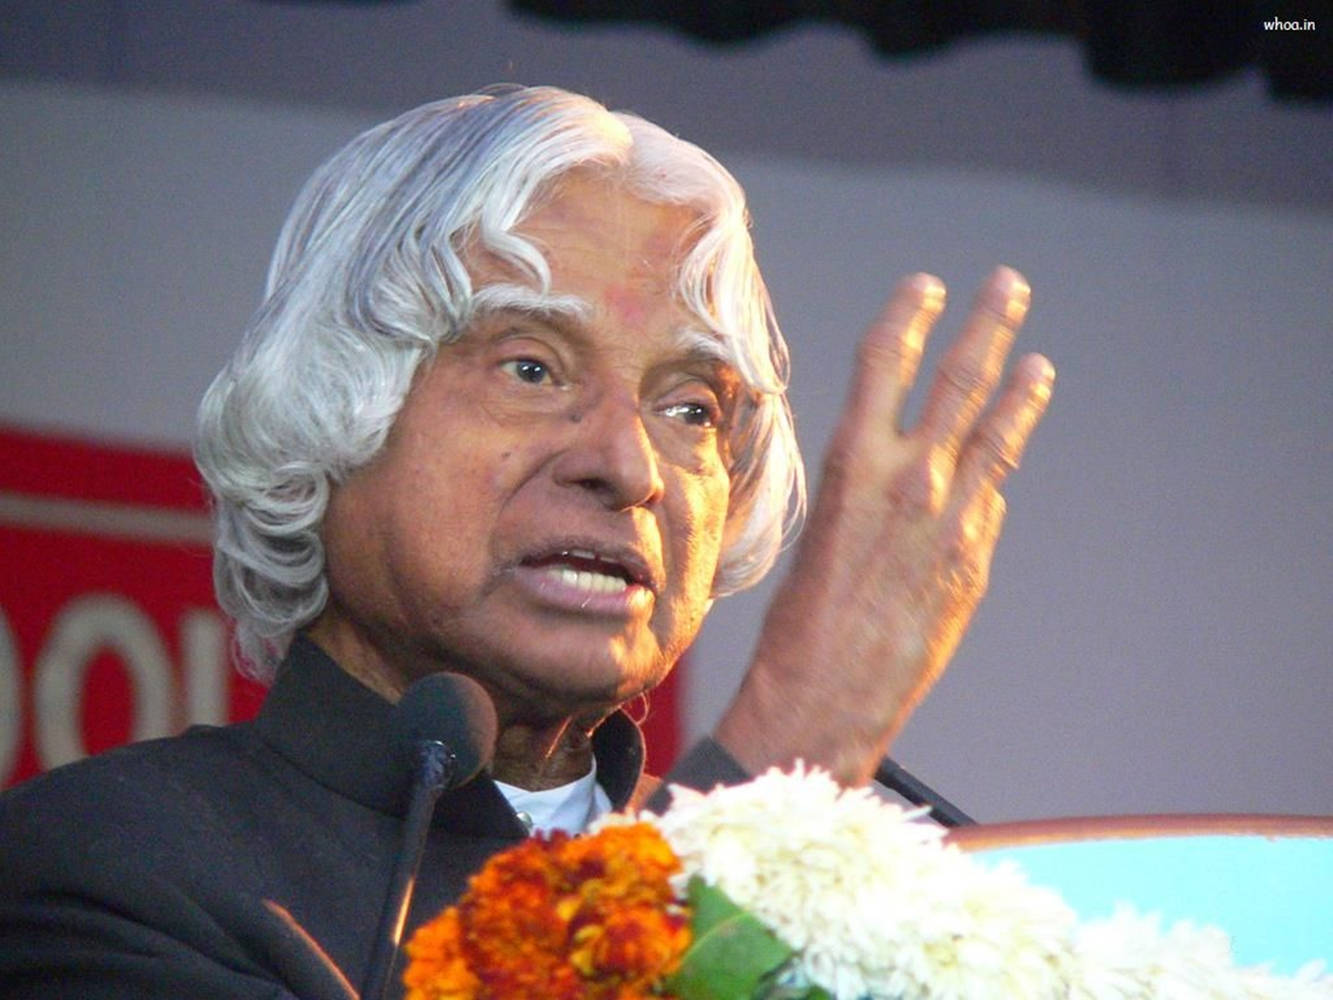 Dr. Abdul Kalam during one of his inspiring lectures Wallpaper